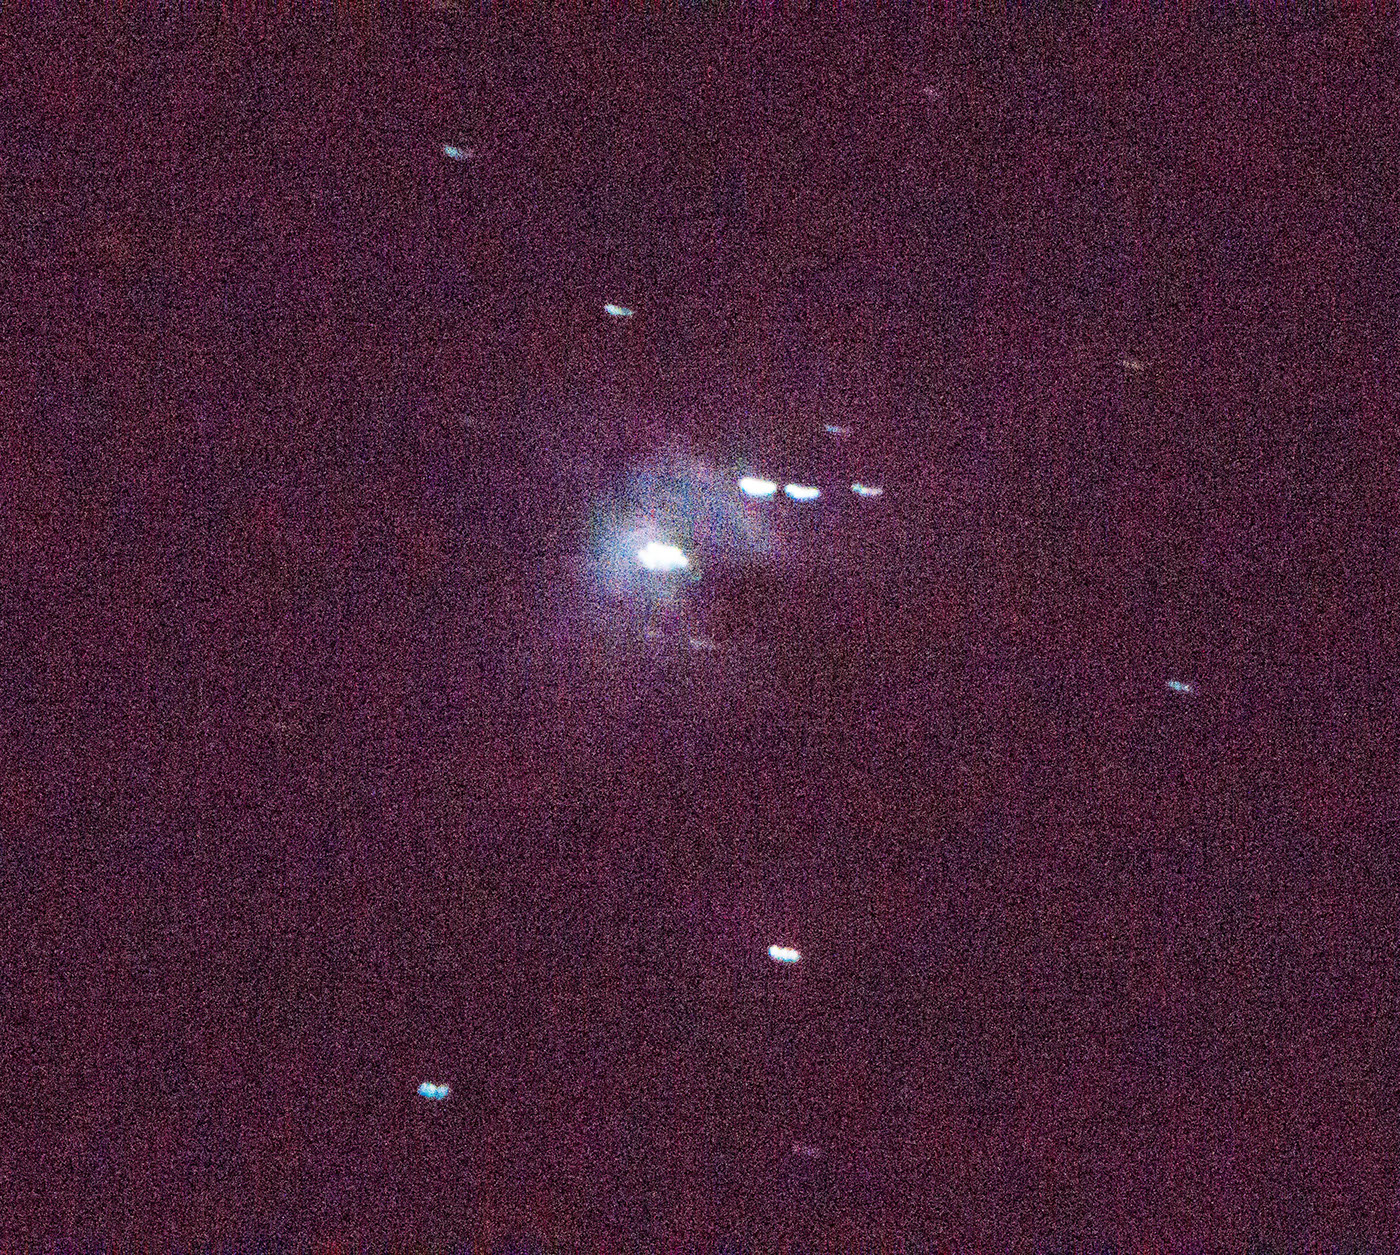 Pentax K-50. 2SEC ISO 51200. Longer exposure bringing out more of the nebular but noise and movement becomes an issue.